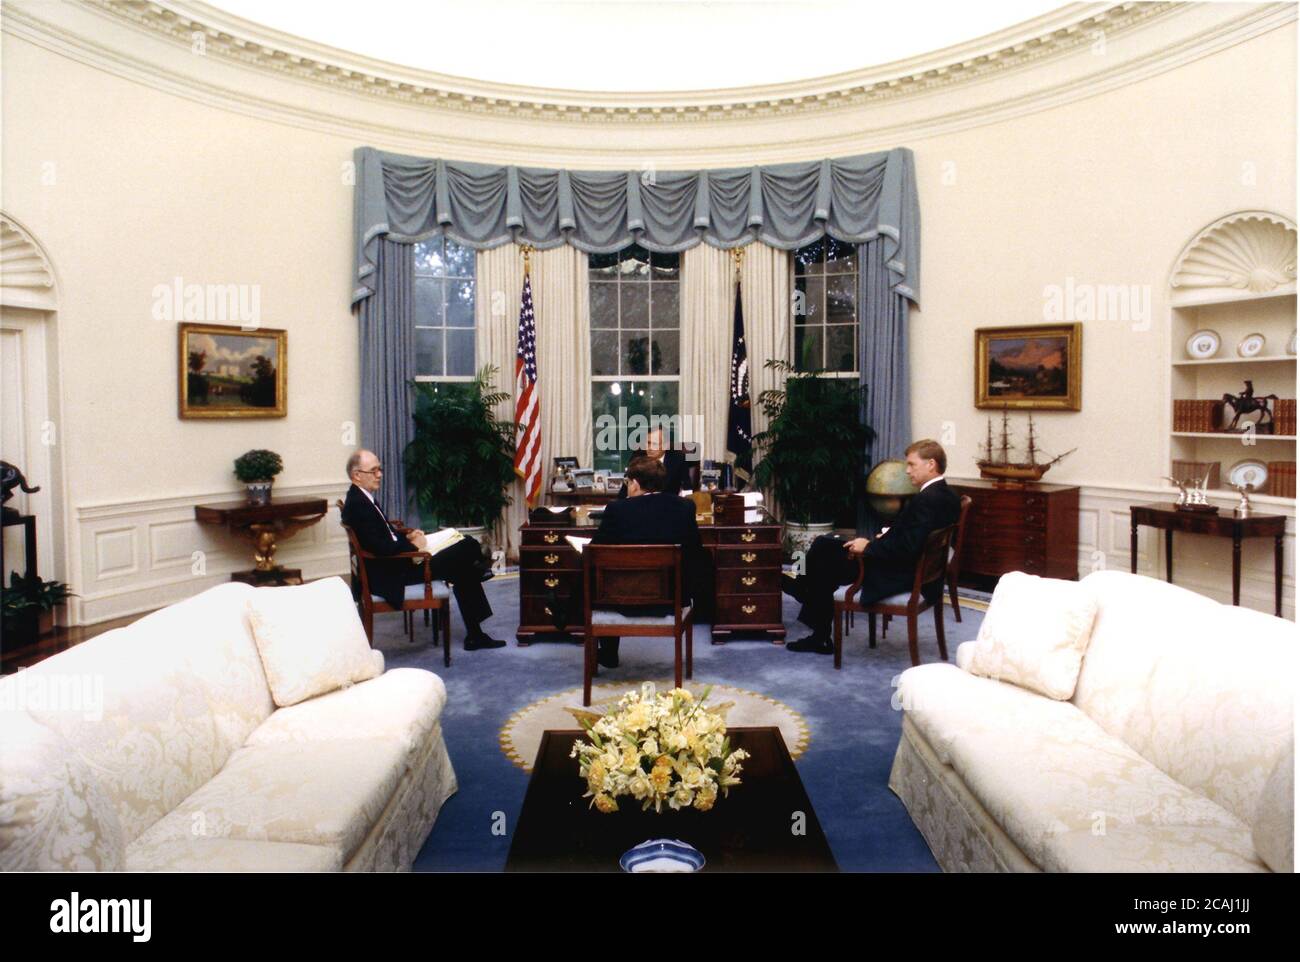 In this file photo, Washington, DC - August 9, 1990 -- United States President George W. Bush meets with national security advisors in the Oval Office at the White House in Washington, DC on August 9, 1990 to discuss the situation in the Persian Gulf and Middle East. National Security Advisor Brent Scowcroft is at far left, President Bush is at center facing camera, Vice President Dan Quayle is at far right, and White House Chief of Staff John Sununu is at center with his back to the camera. Credit: White House via CNP | usage worldwide Stock Photo